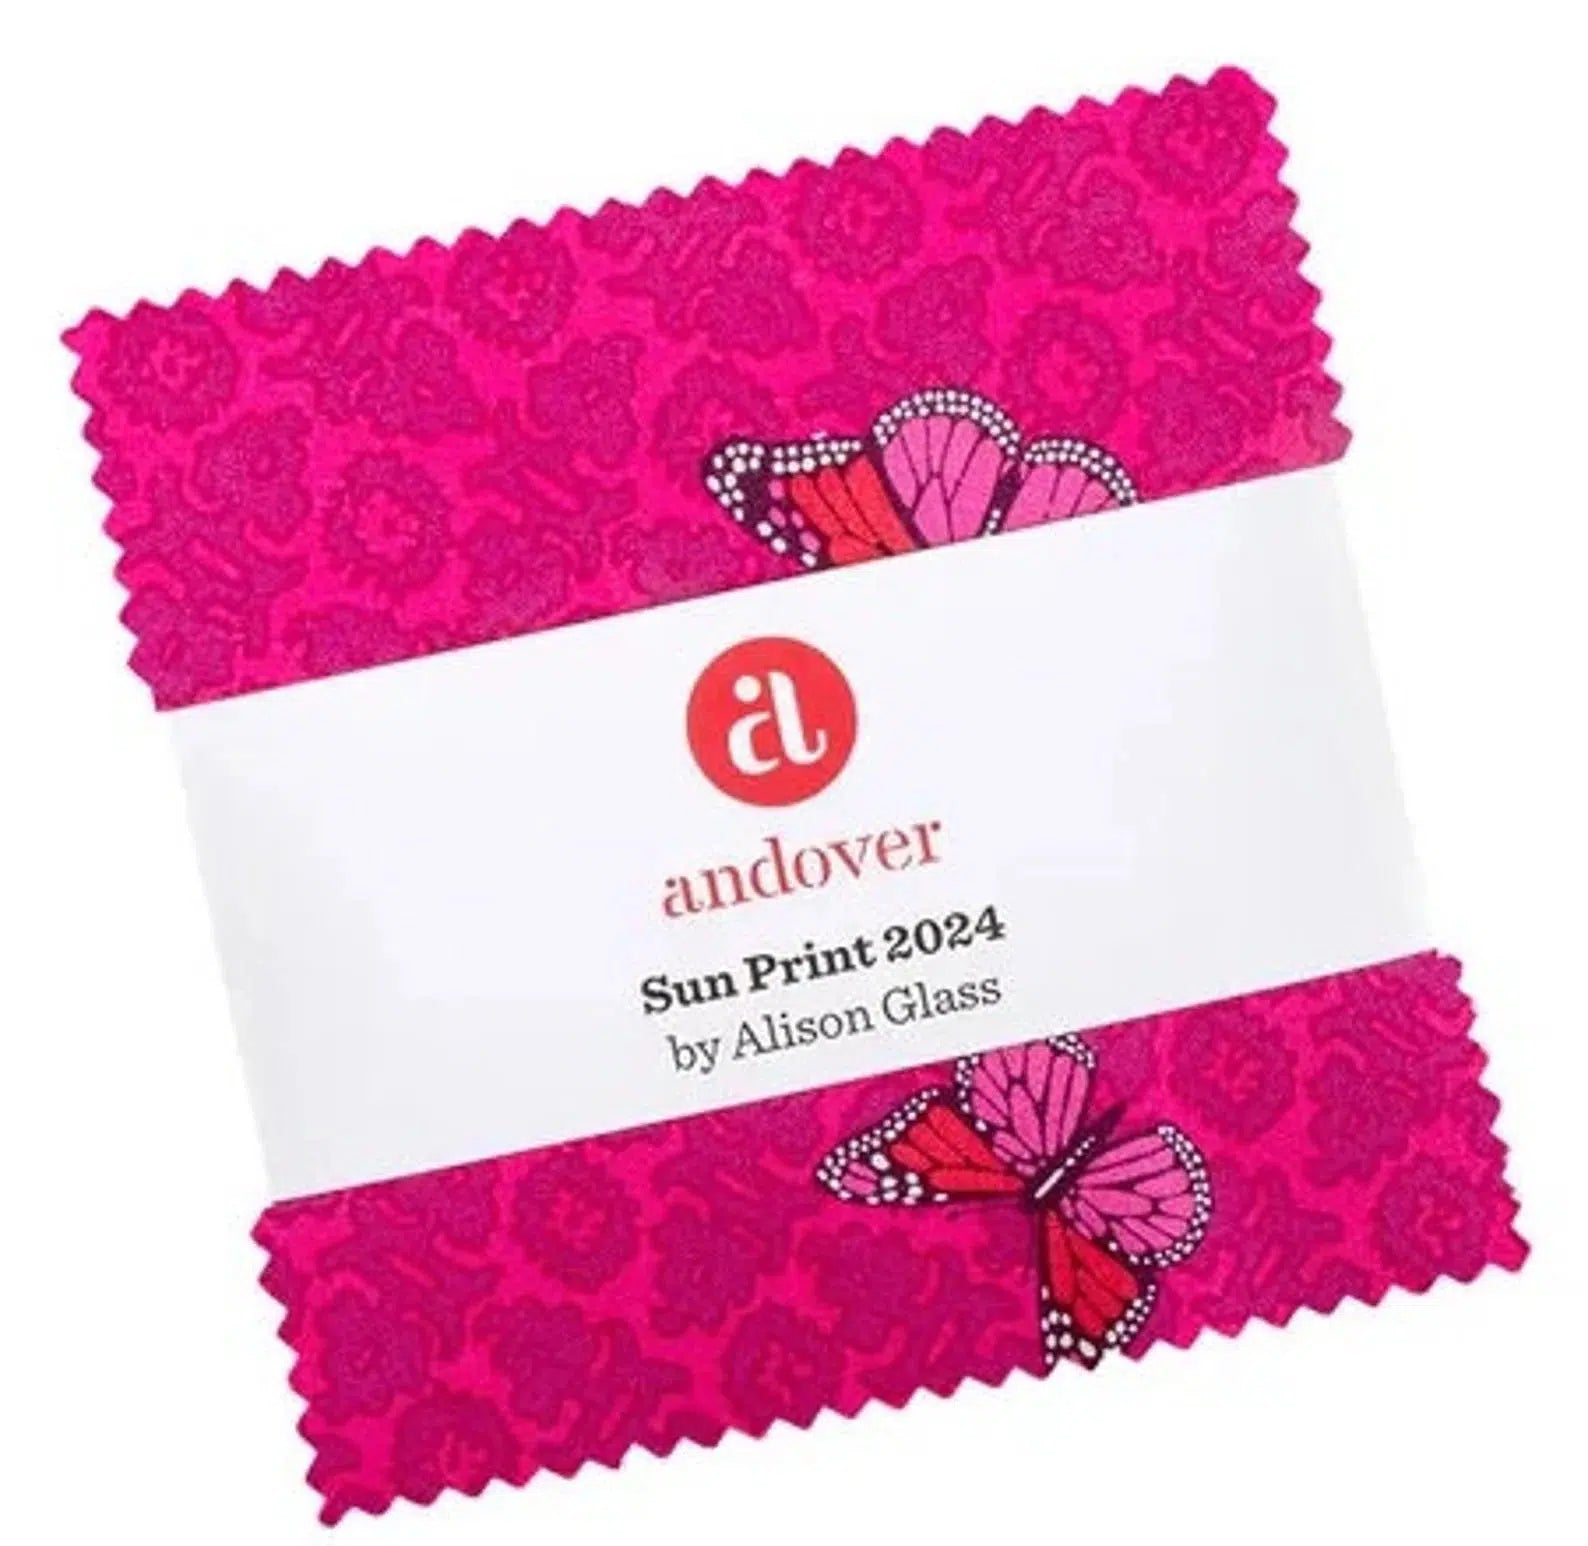 Sun Print 2024 5" Charm Pack-Andover-My Favorite Quilt Store